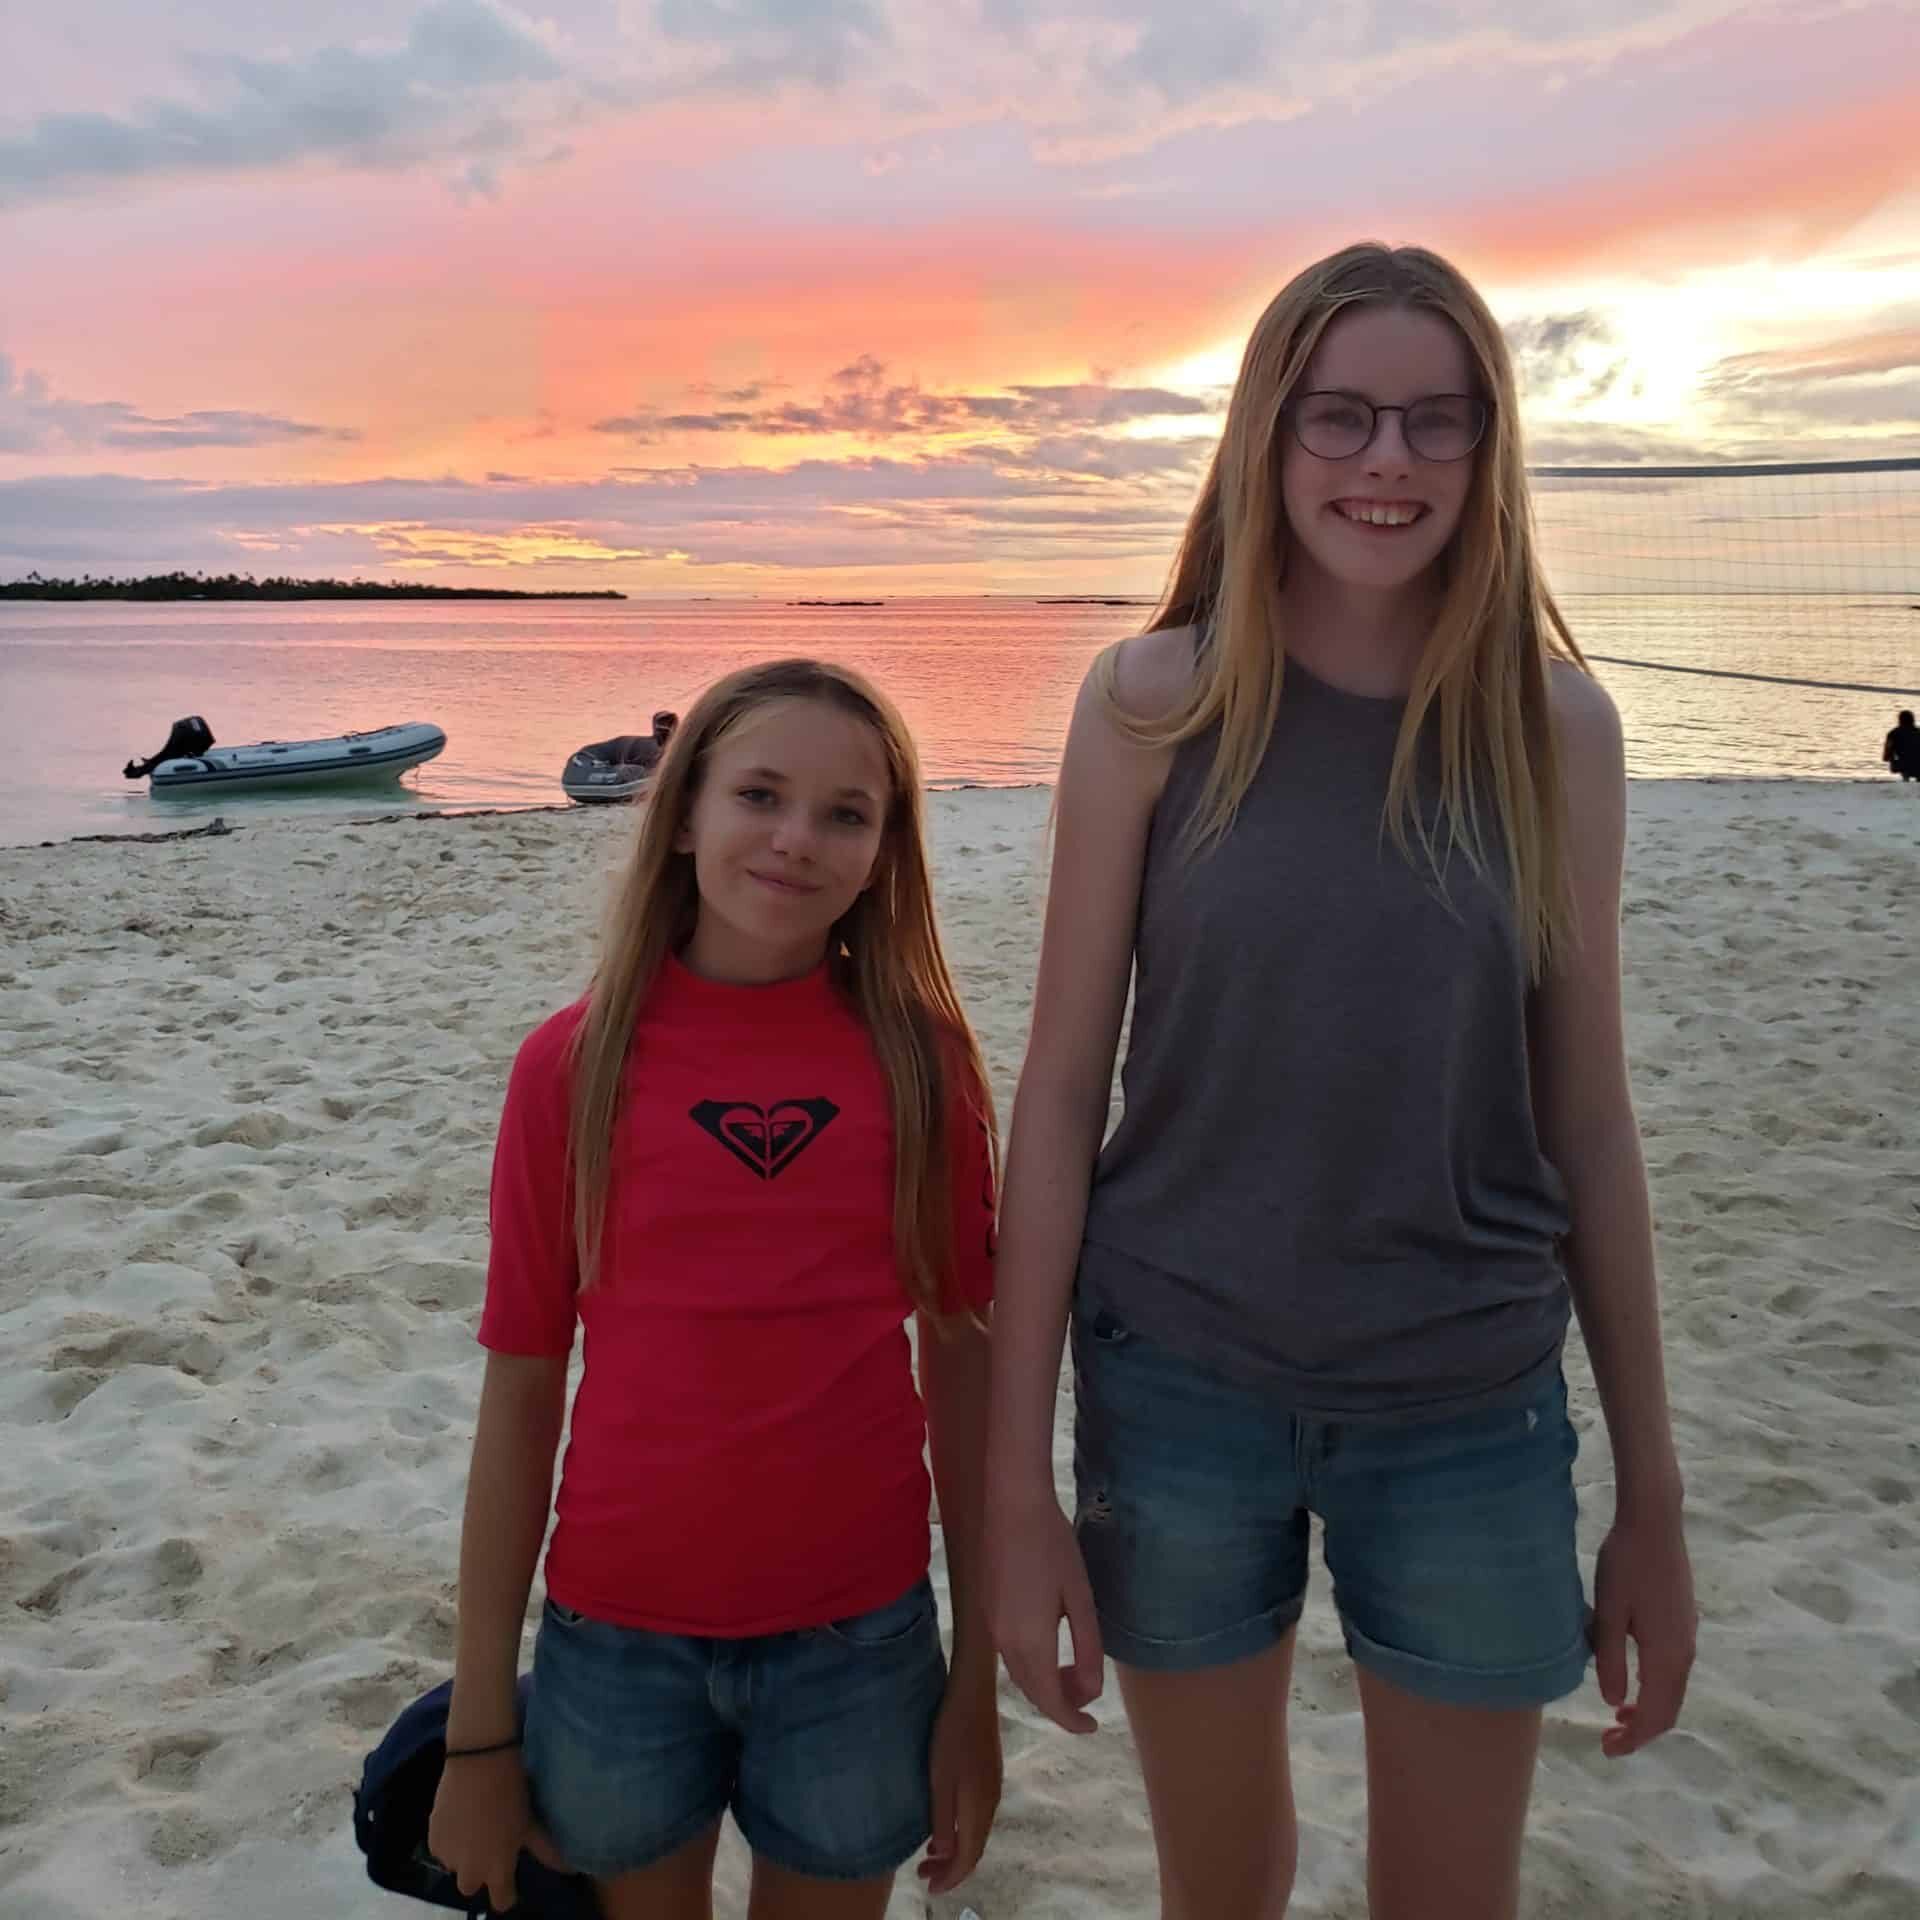 Pippa and Isla on an Island at Sunset